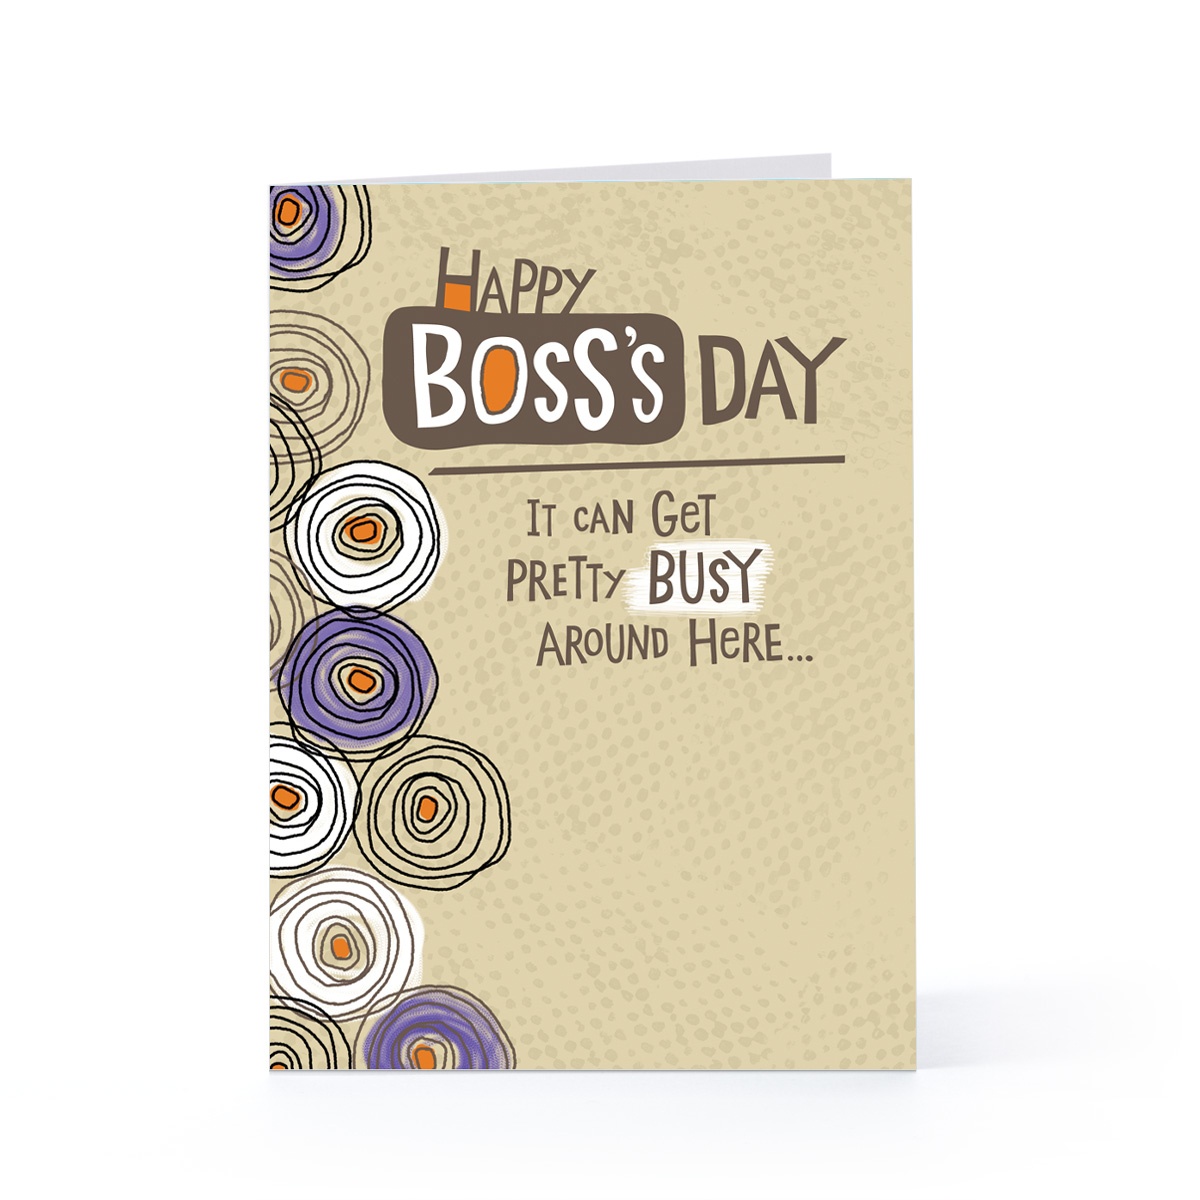 oil-and-blue-free-printables-happy-boss-day-card-free-printable